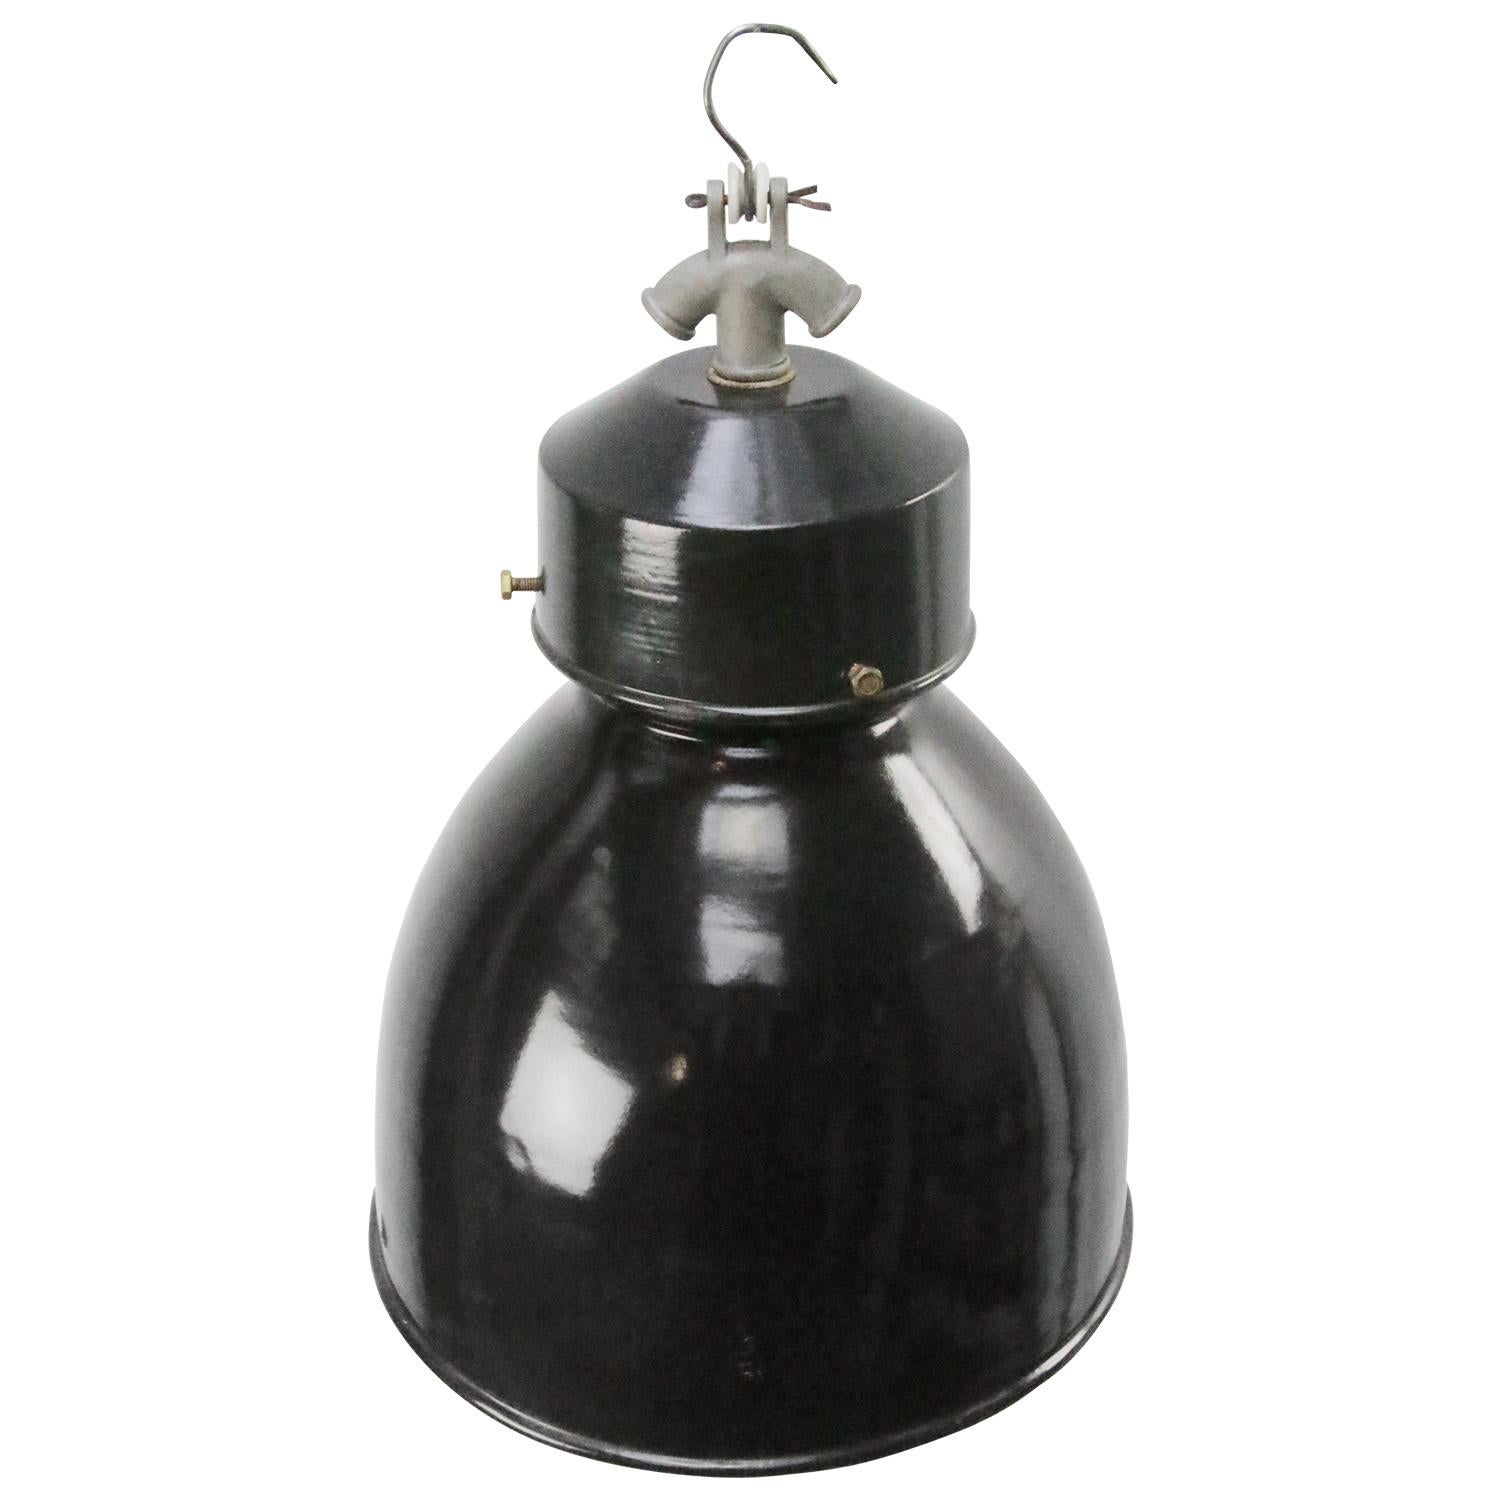 French black Industrial pendant lamp by GAL, France
Used in warehouses and factories in France and Belgium. 

Weight: 2.00 kg / 4.4 lb

Priced per individual item. All lamps have been made suitable by international standards for incandescent